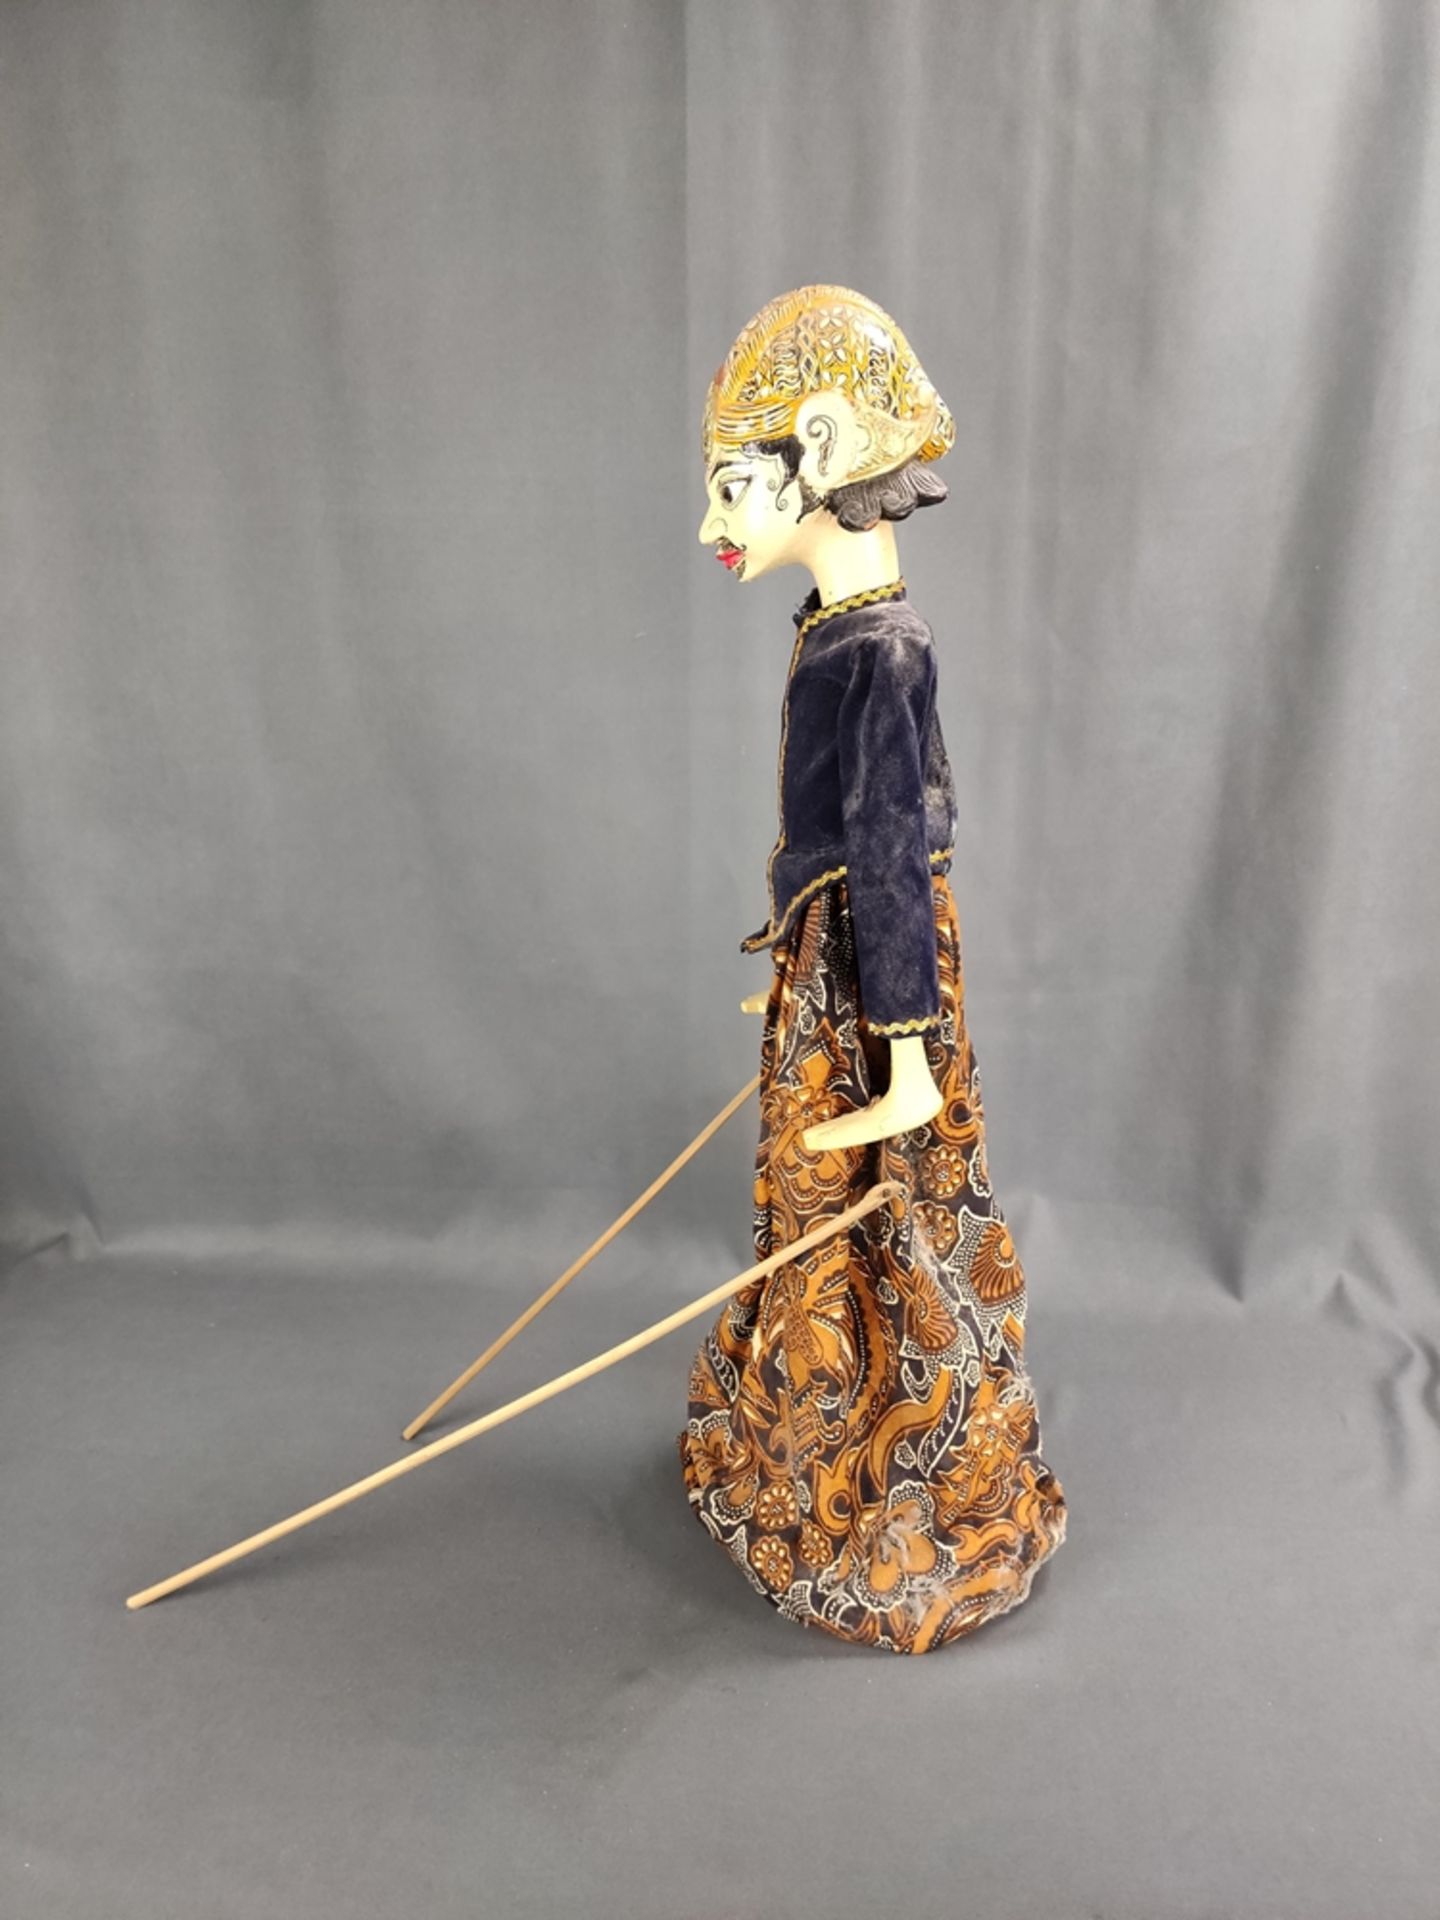 Wayang-Golek doll, Indonesian stick doll, head, torso and arms carved, clothes elaborately - Image 2 of 3